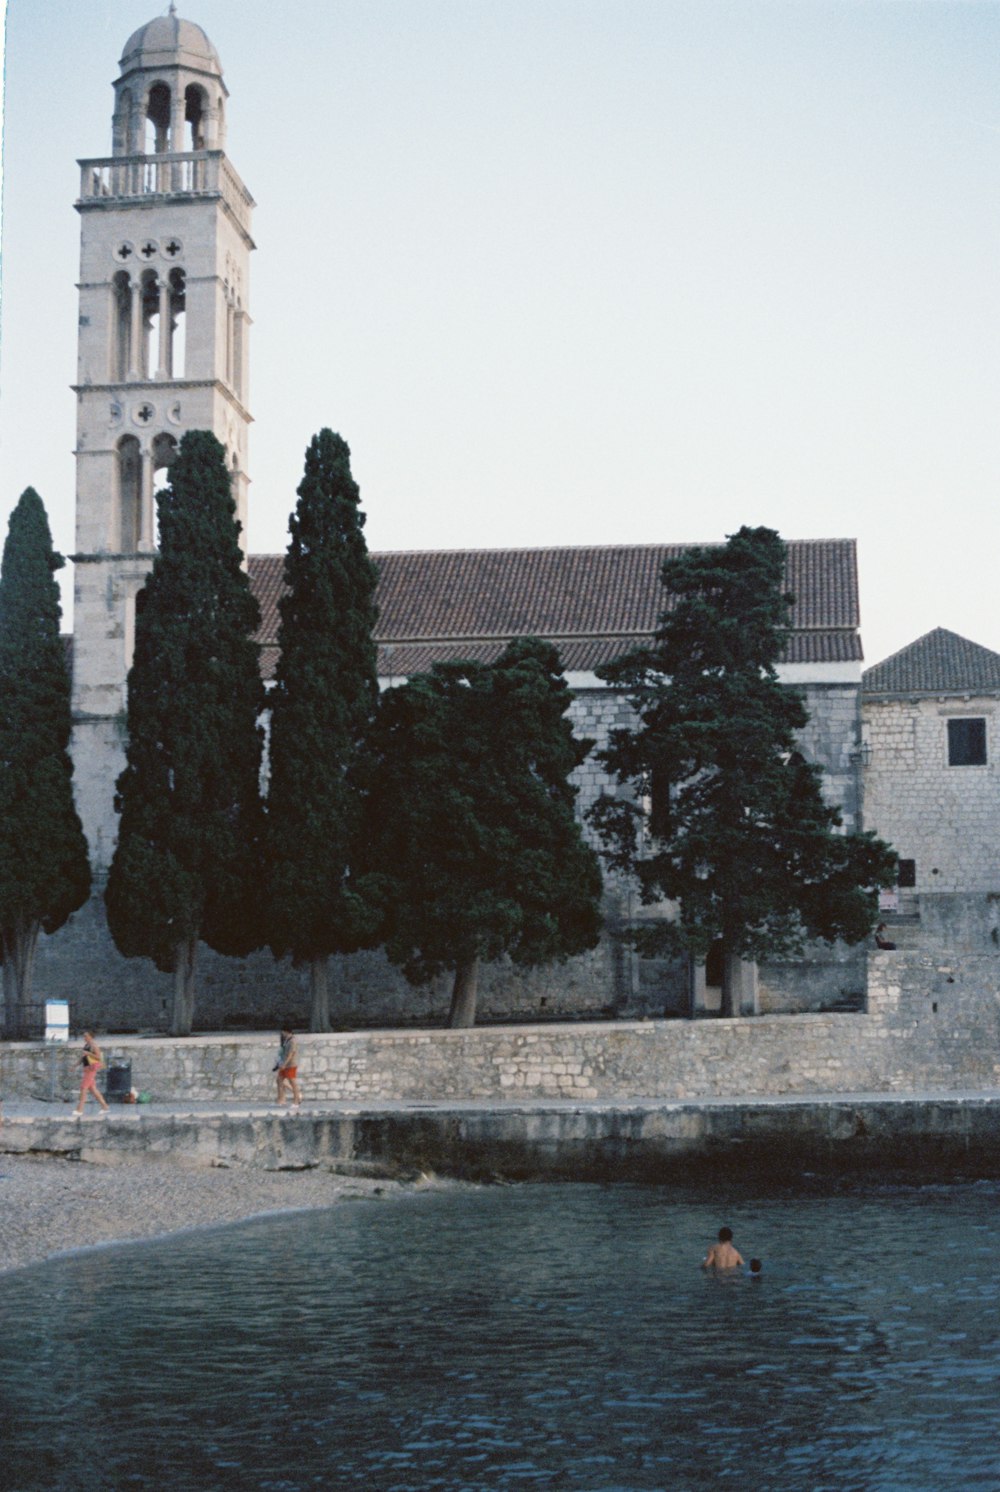 a building with a clock tower next to a body of water